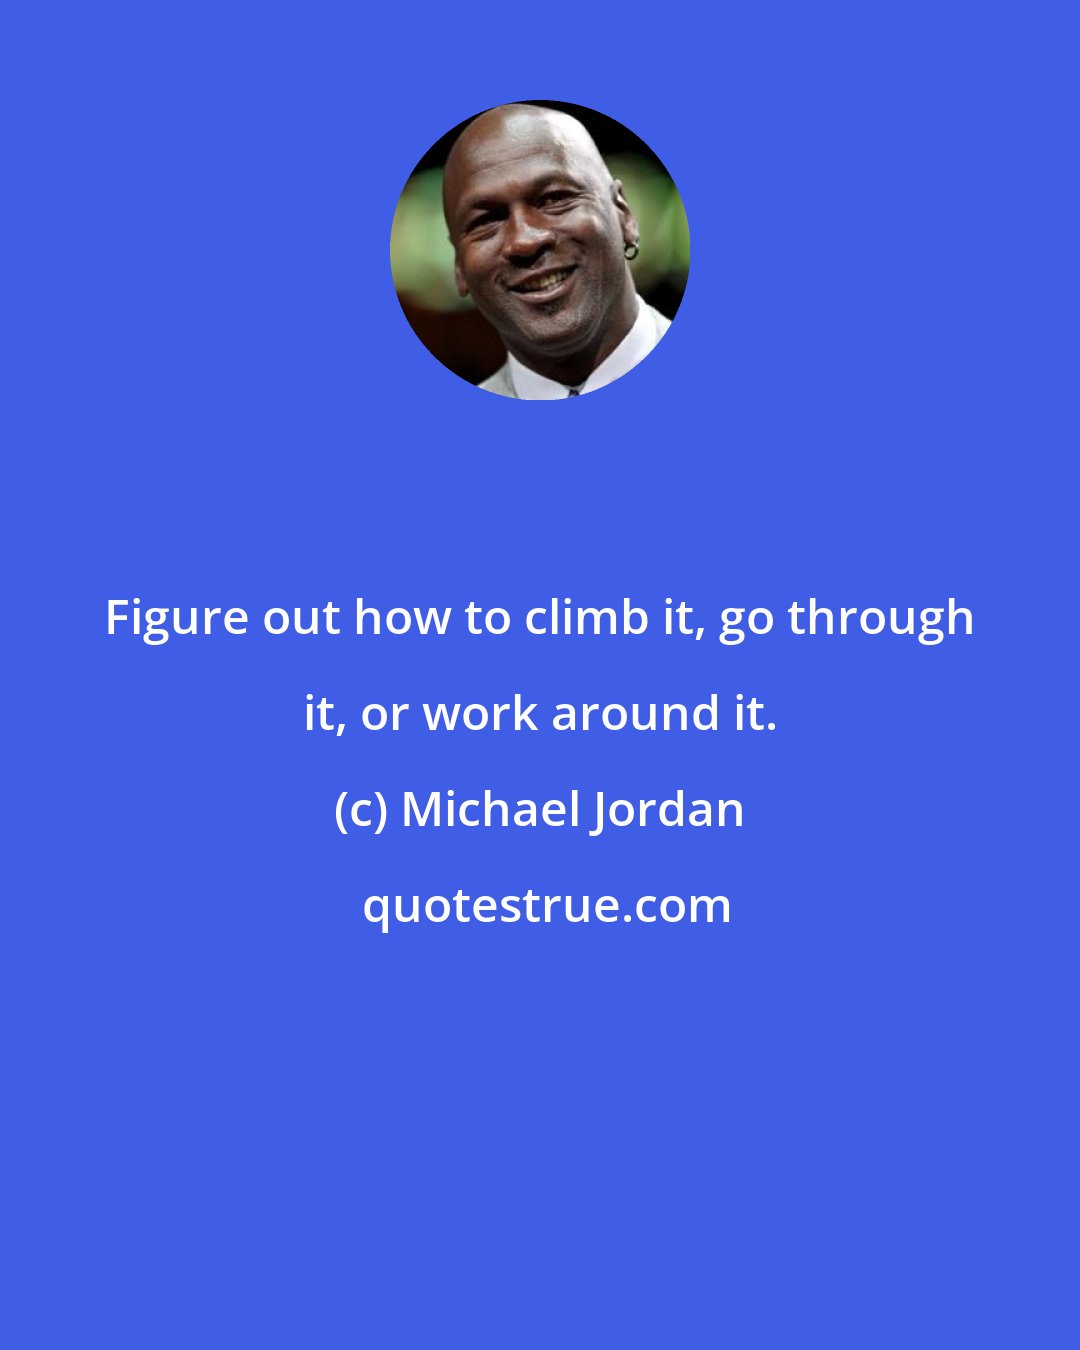 Michael Jordan: Figure out how to climb it, go through it, or work around it.